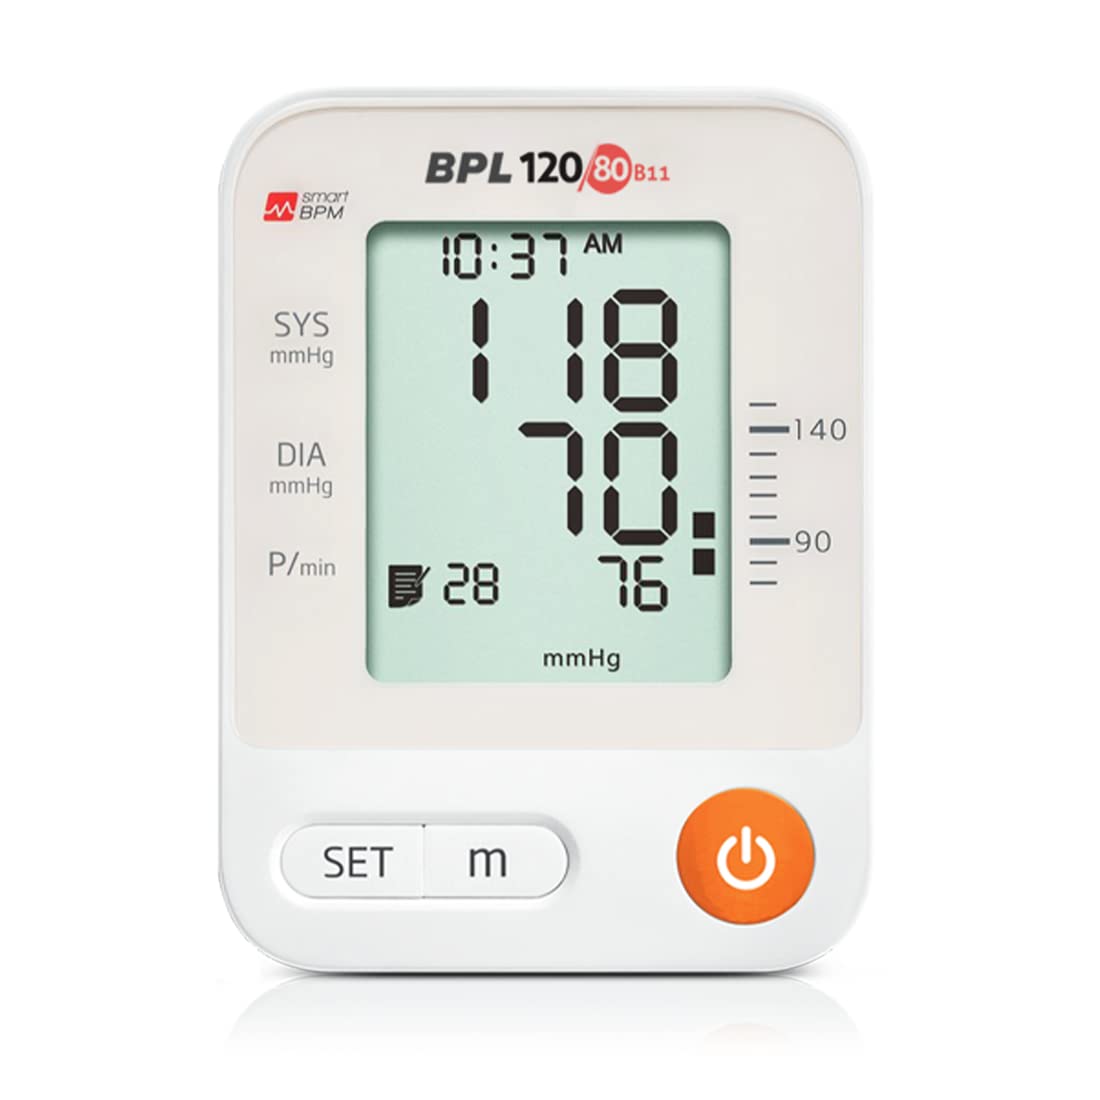 BPL Medical Technologies Automatic Blood Pressure Monitor BPL 120/80 B11 - (White)